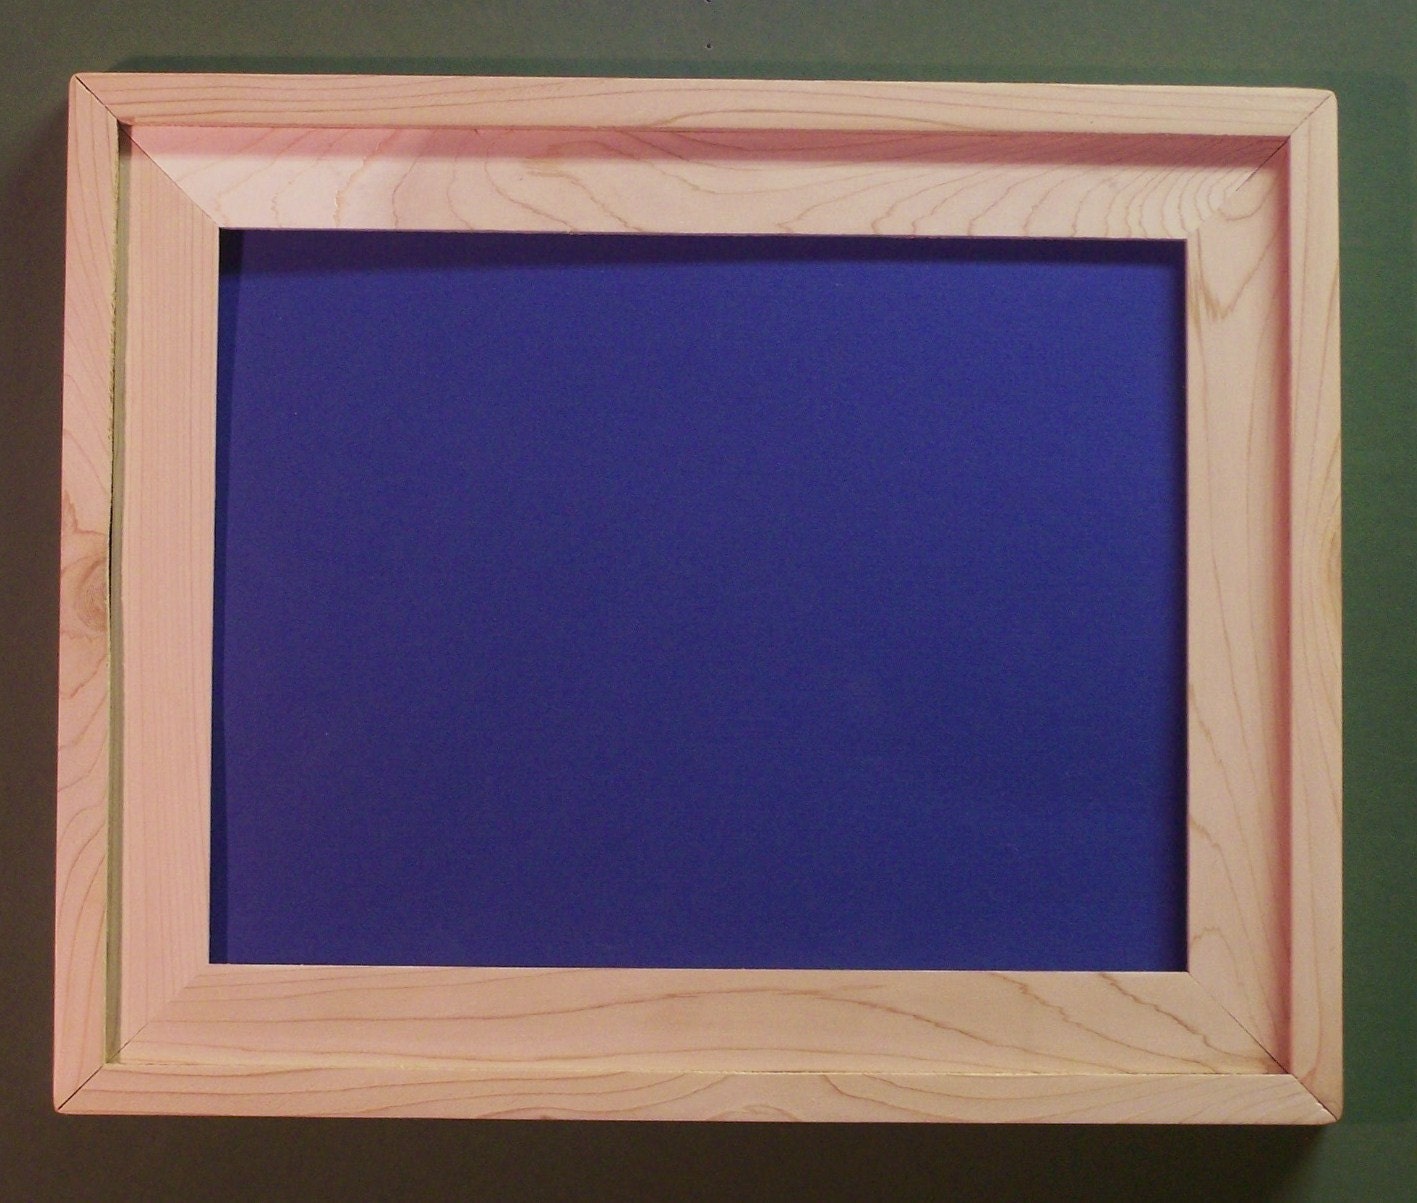 10 x 13 Unfinished Cedar Picture Frame